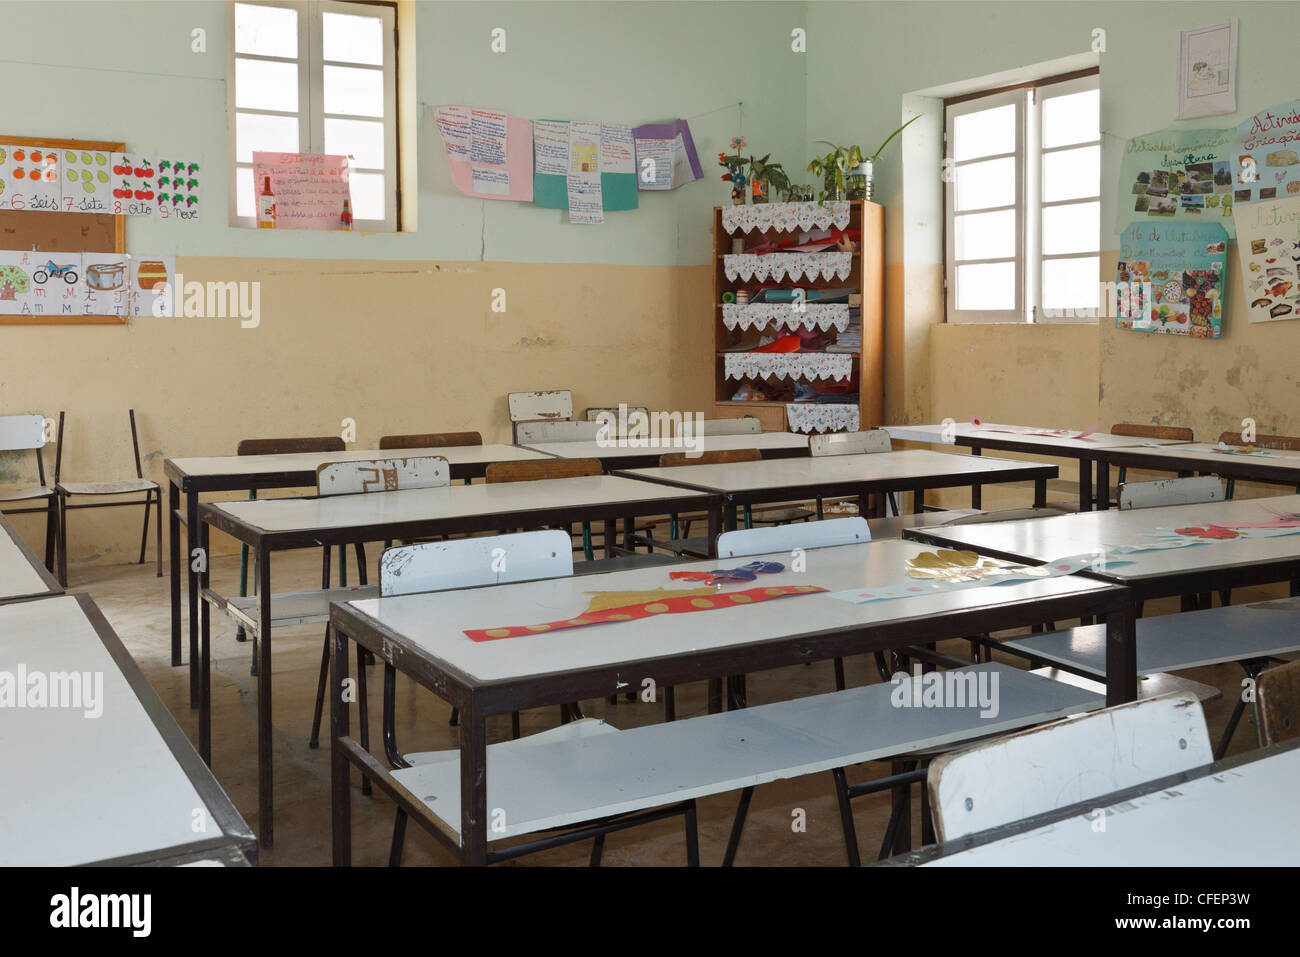 Rows of empty desks inside the sparsely furnished primary school classroom in Sal Rei, Boa Vista, Cape Verde Islands. Stock Photo